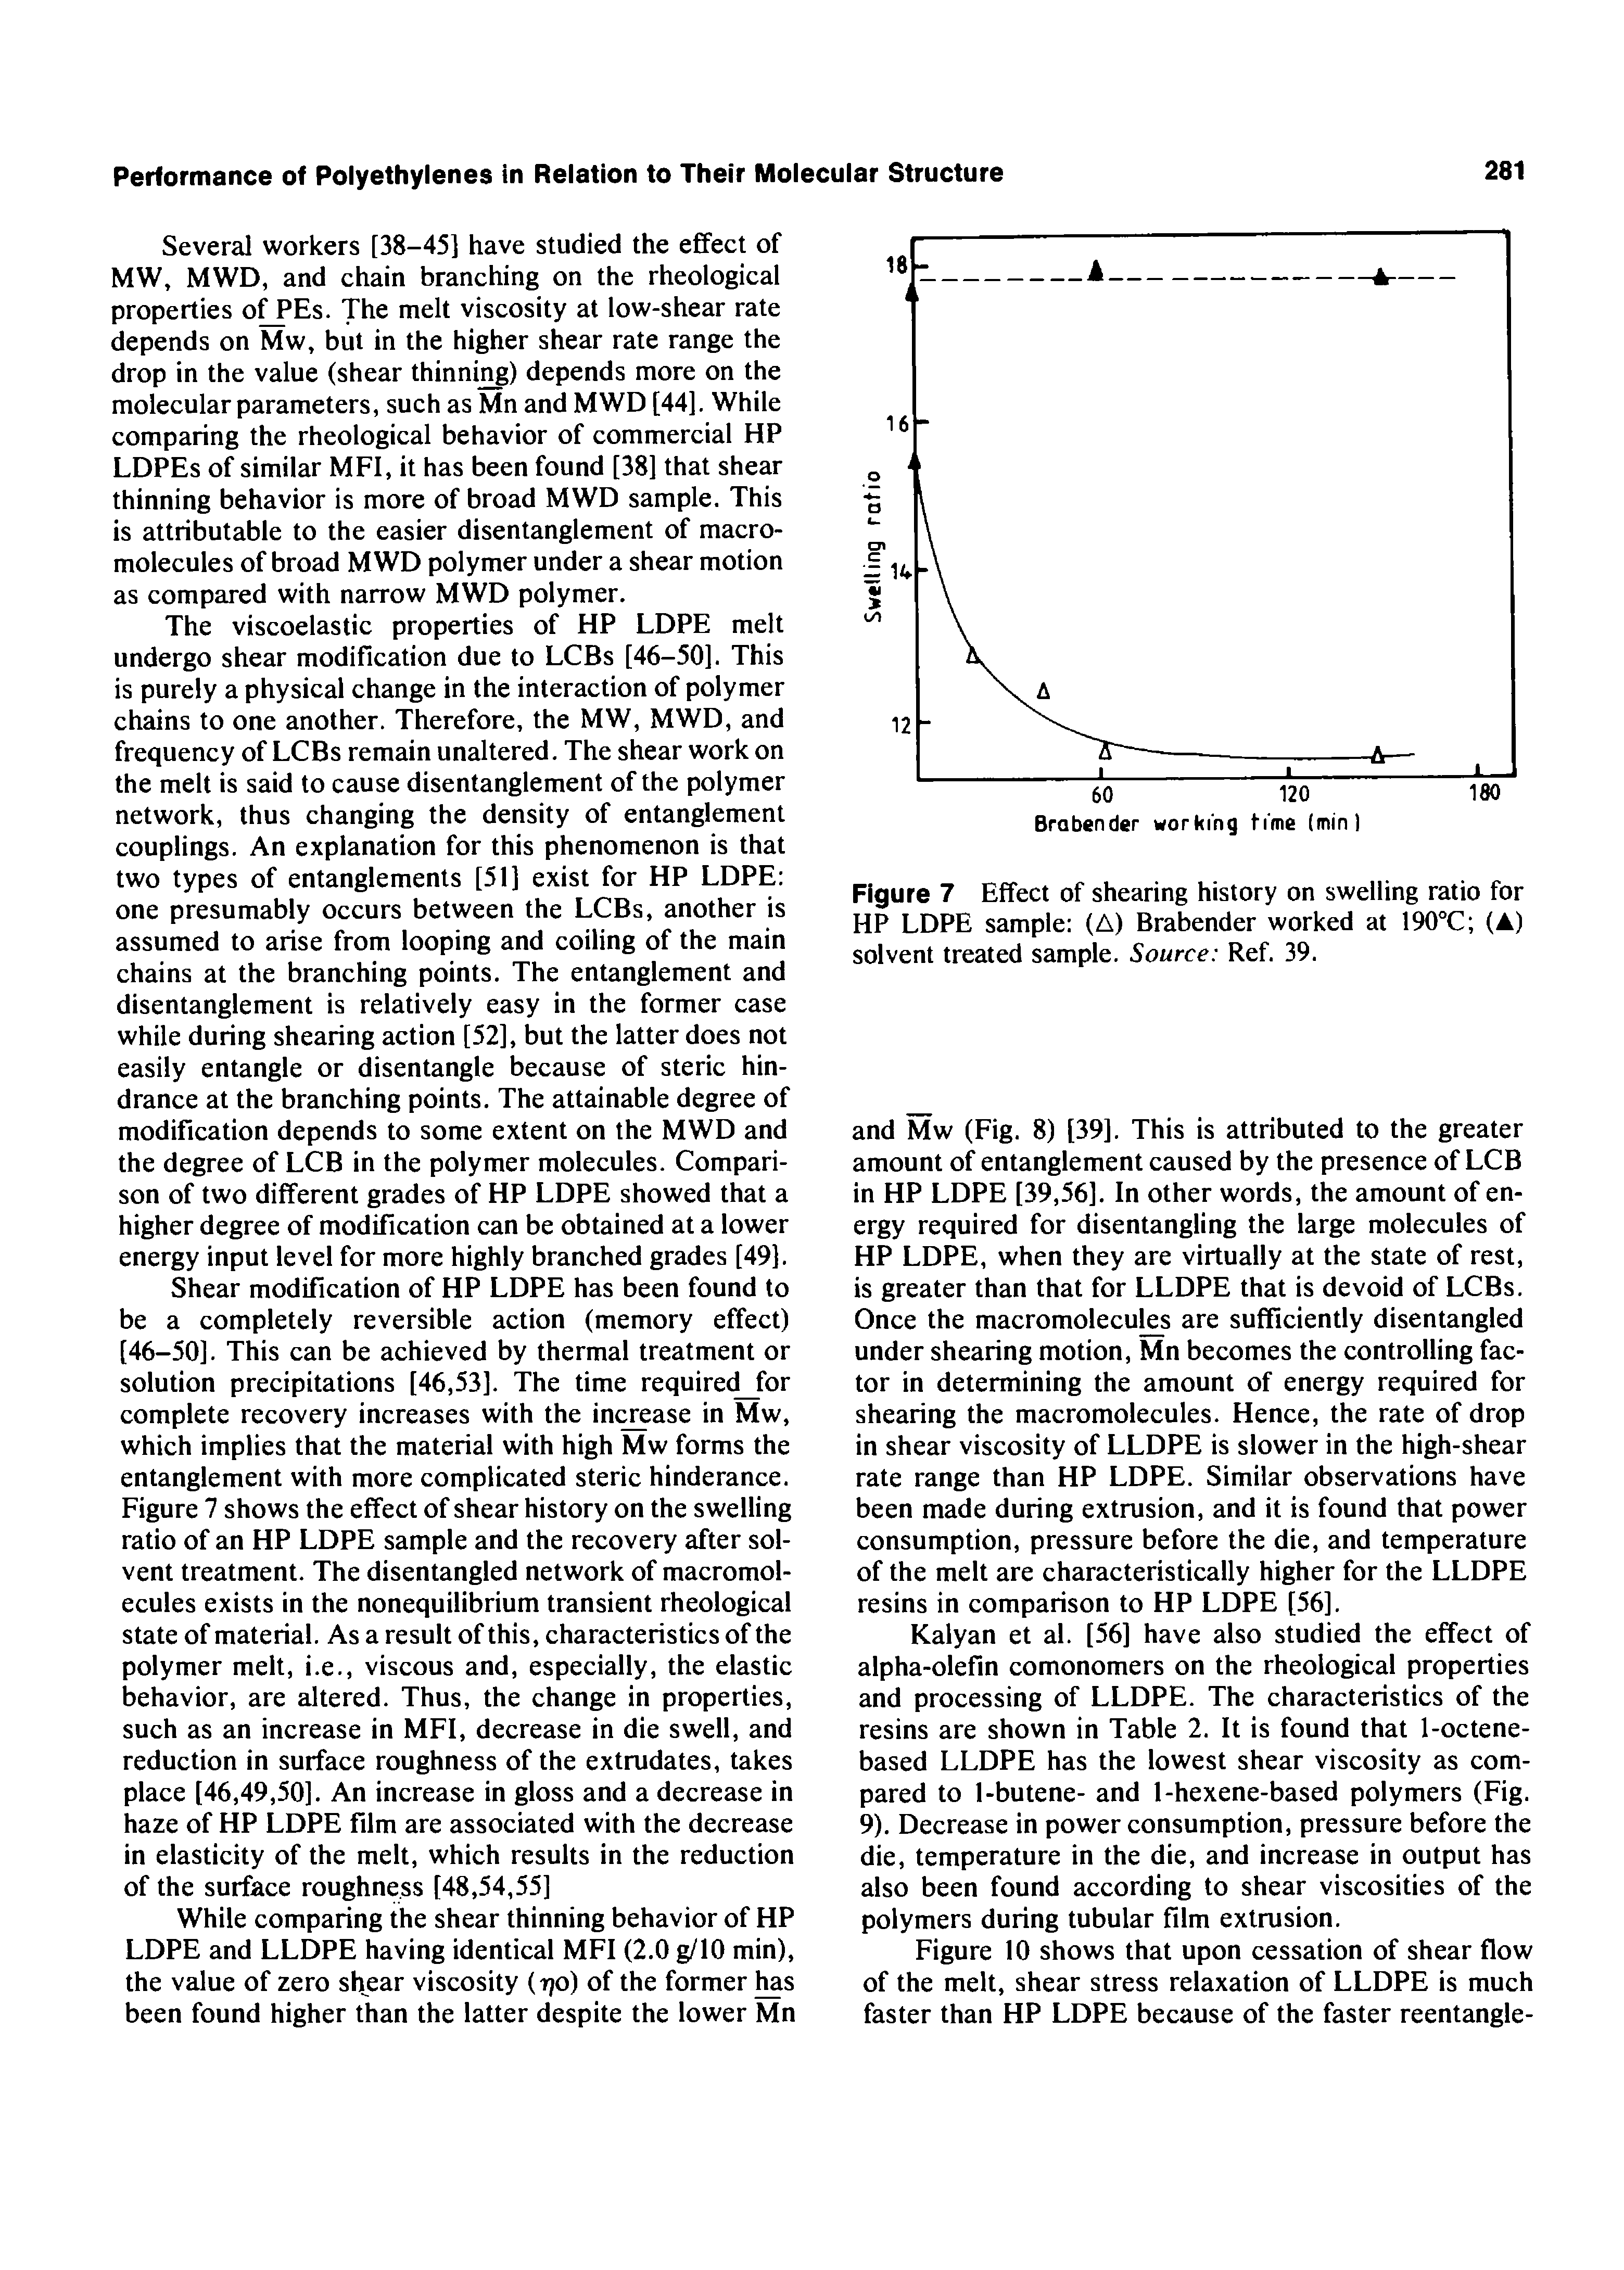 Figure 7 Effect of shearing history on swelling ratio for HP LDPE sample (A) Brabender worked at 190°C (A) solvent treated sample. Source Ref. 39.